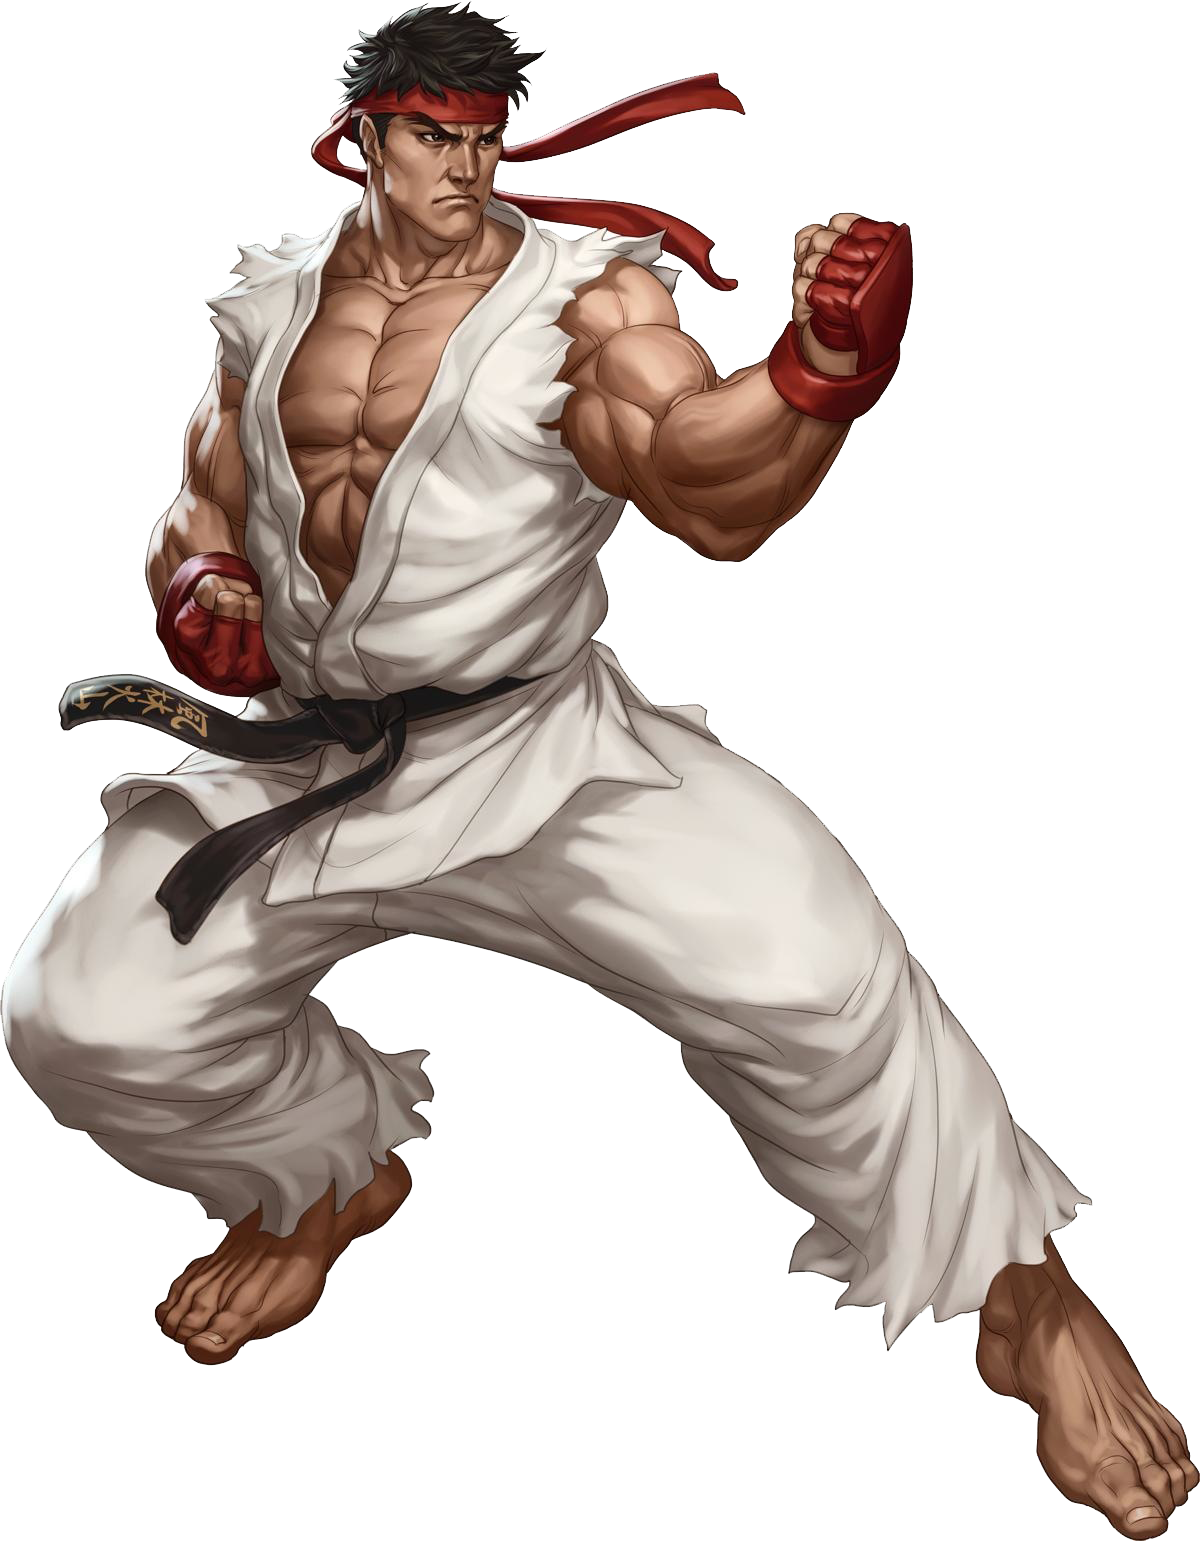 Image result for street fighter ryu